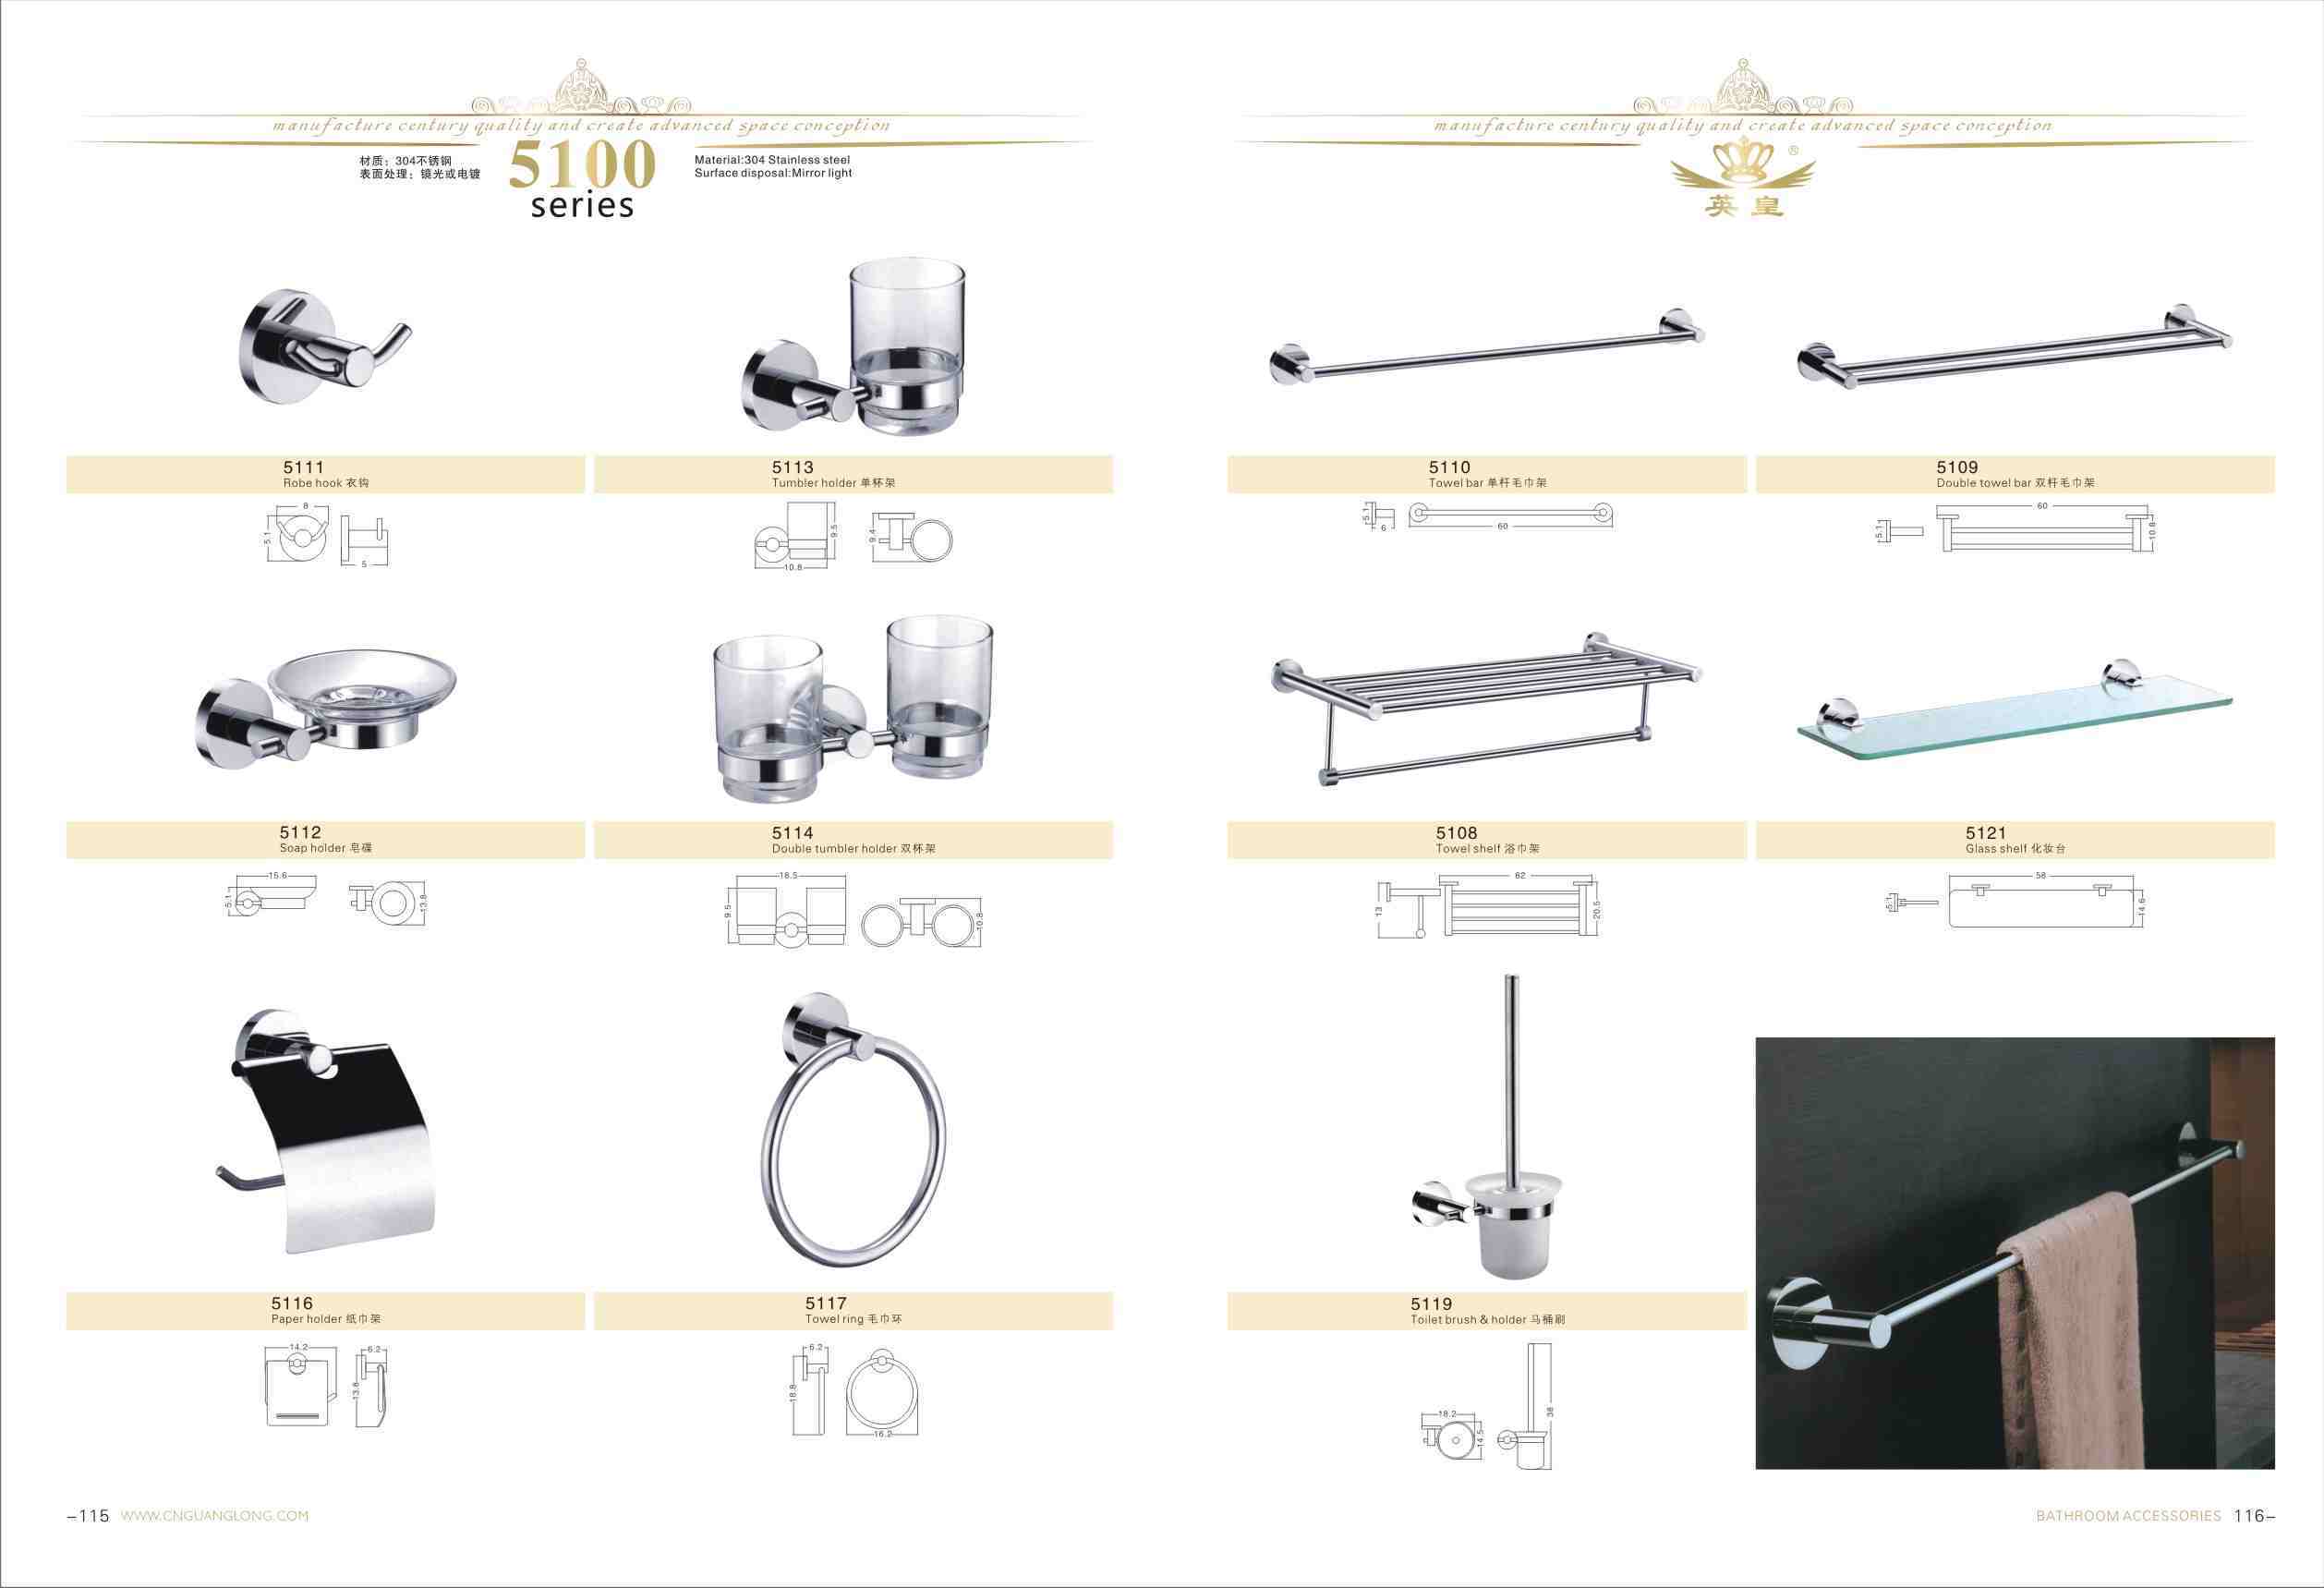 2013 Catalogues S/ST Items